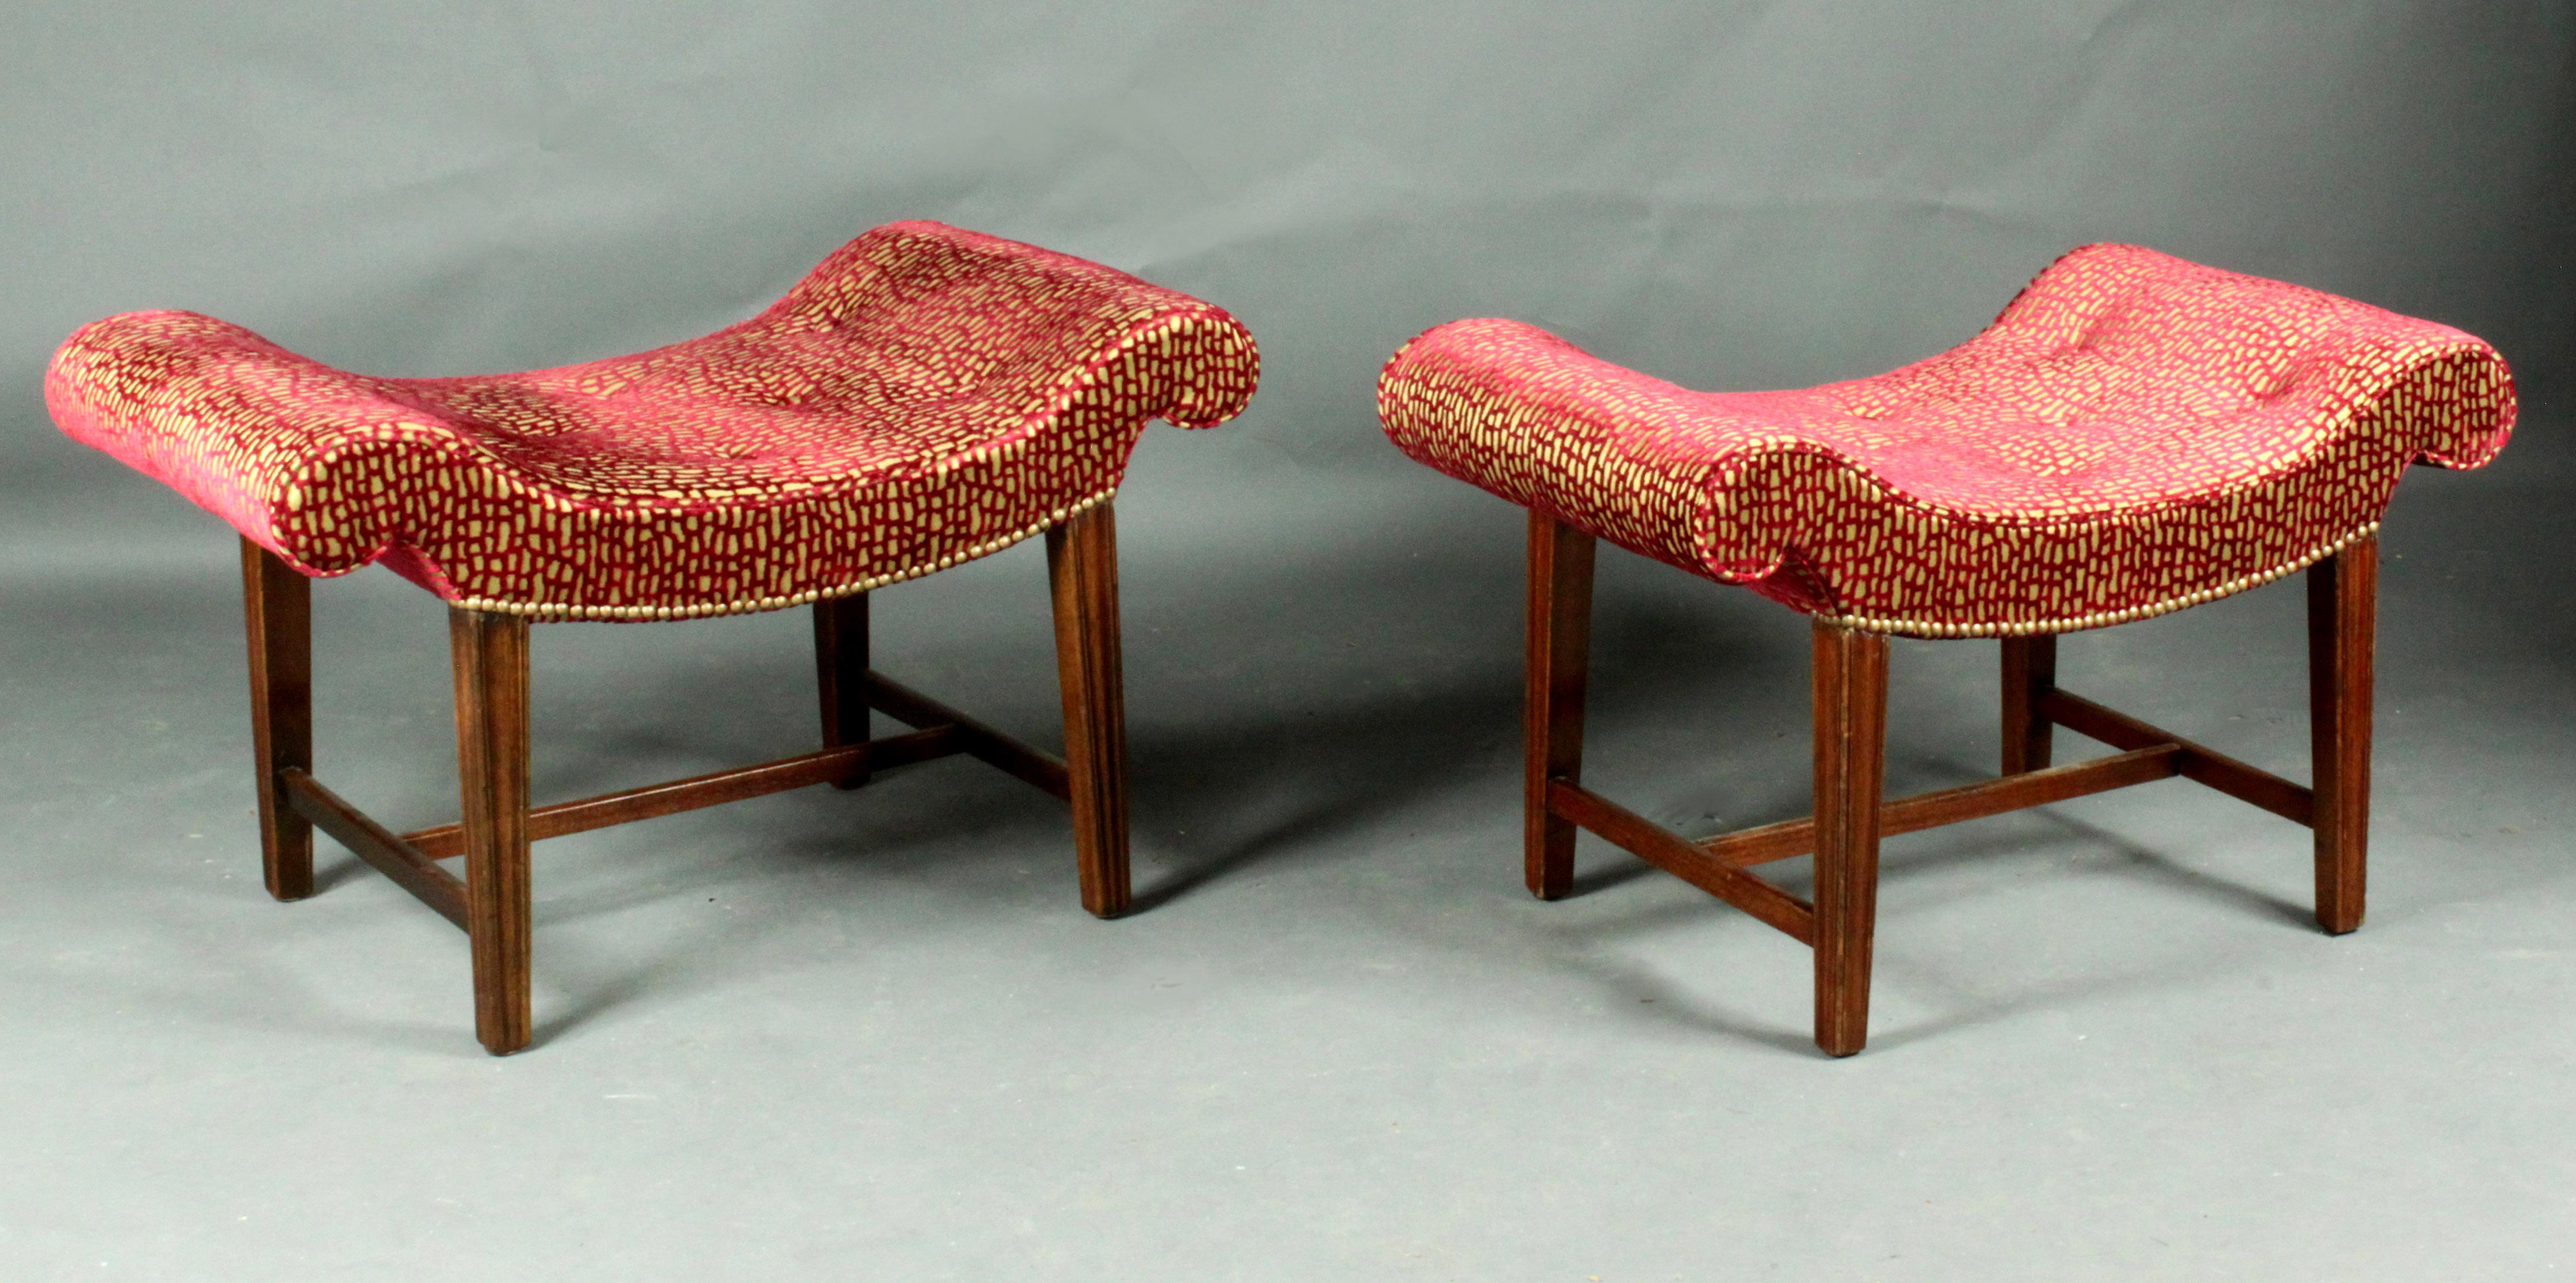 Pair of Chippendale Stools In Good Condition For Sale In Bradford-on-Avon, Wiltshire